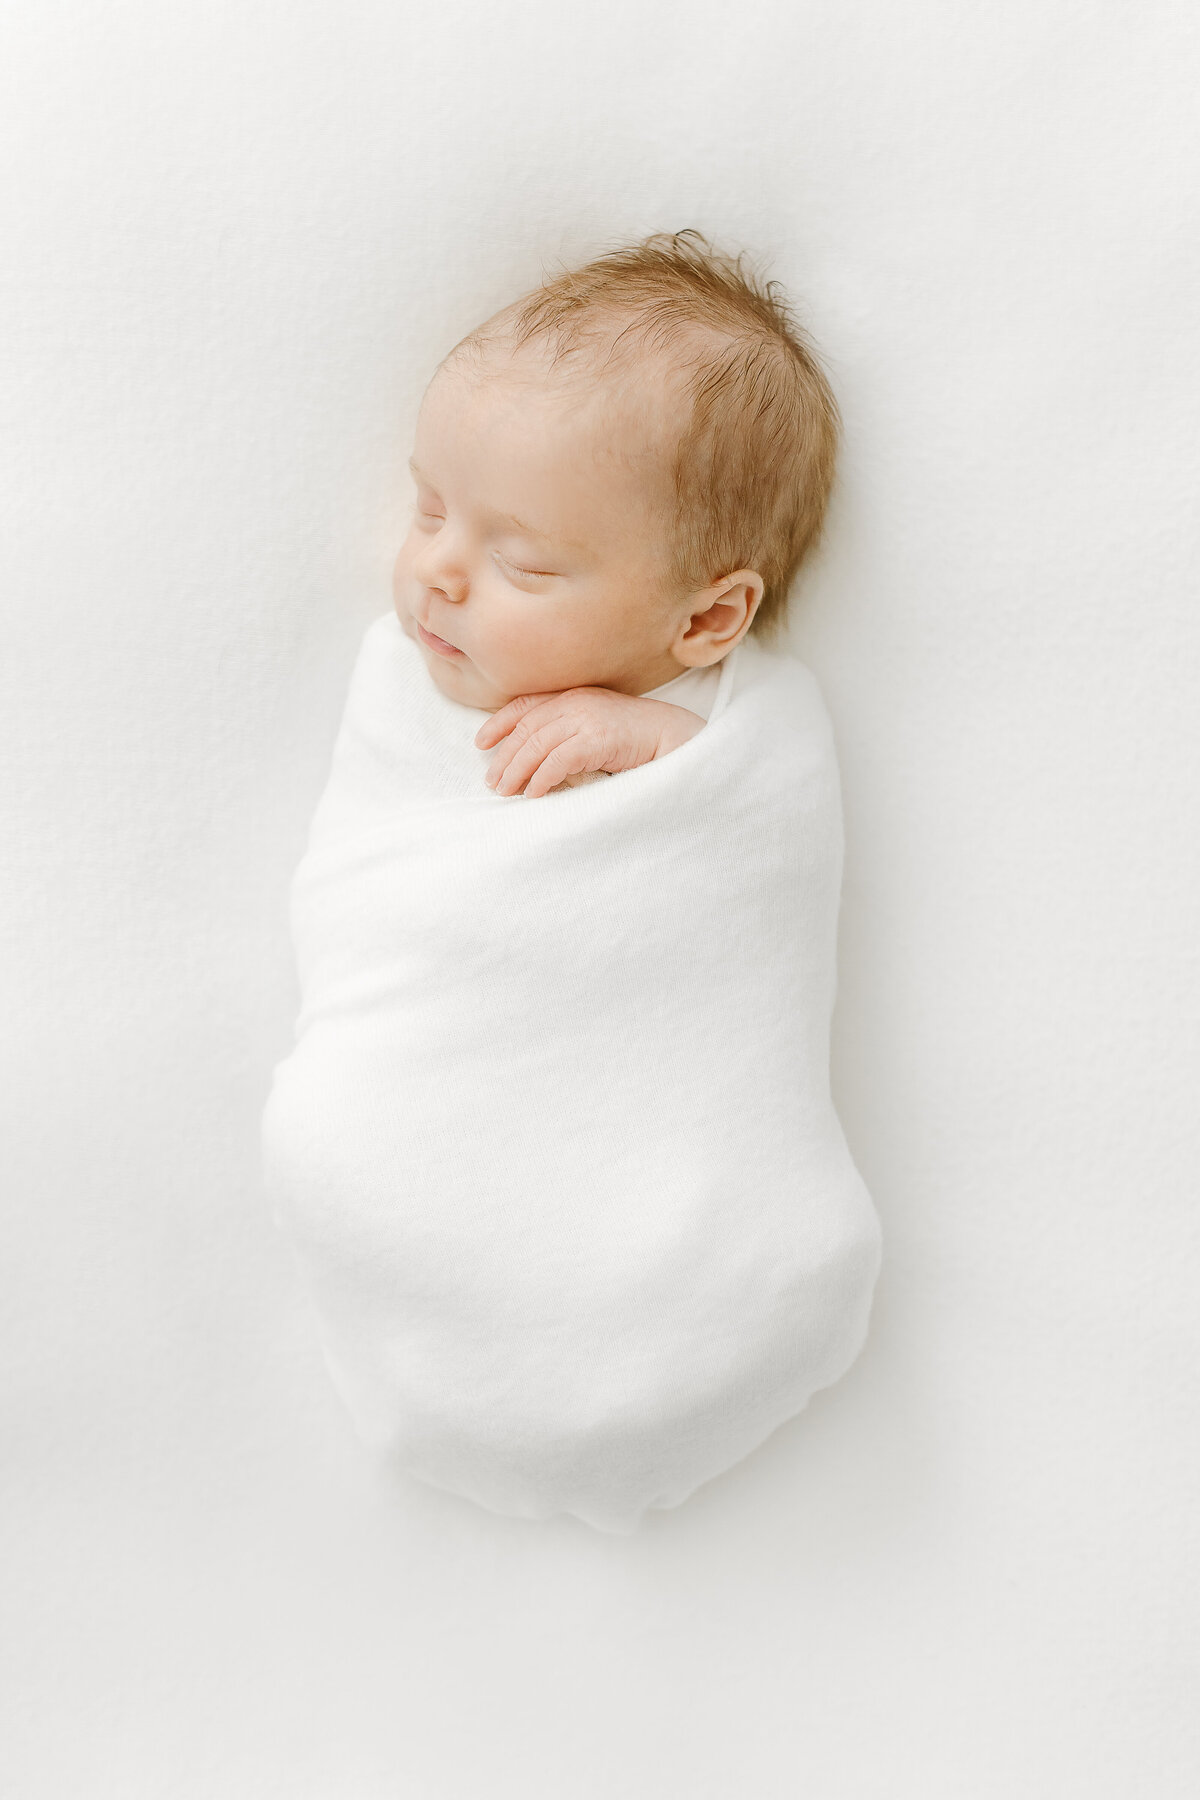 A Northern VA Newborn Photography photo of a beautiful newborn baby girl sleeping in a white swaddle blanket